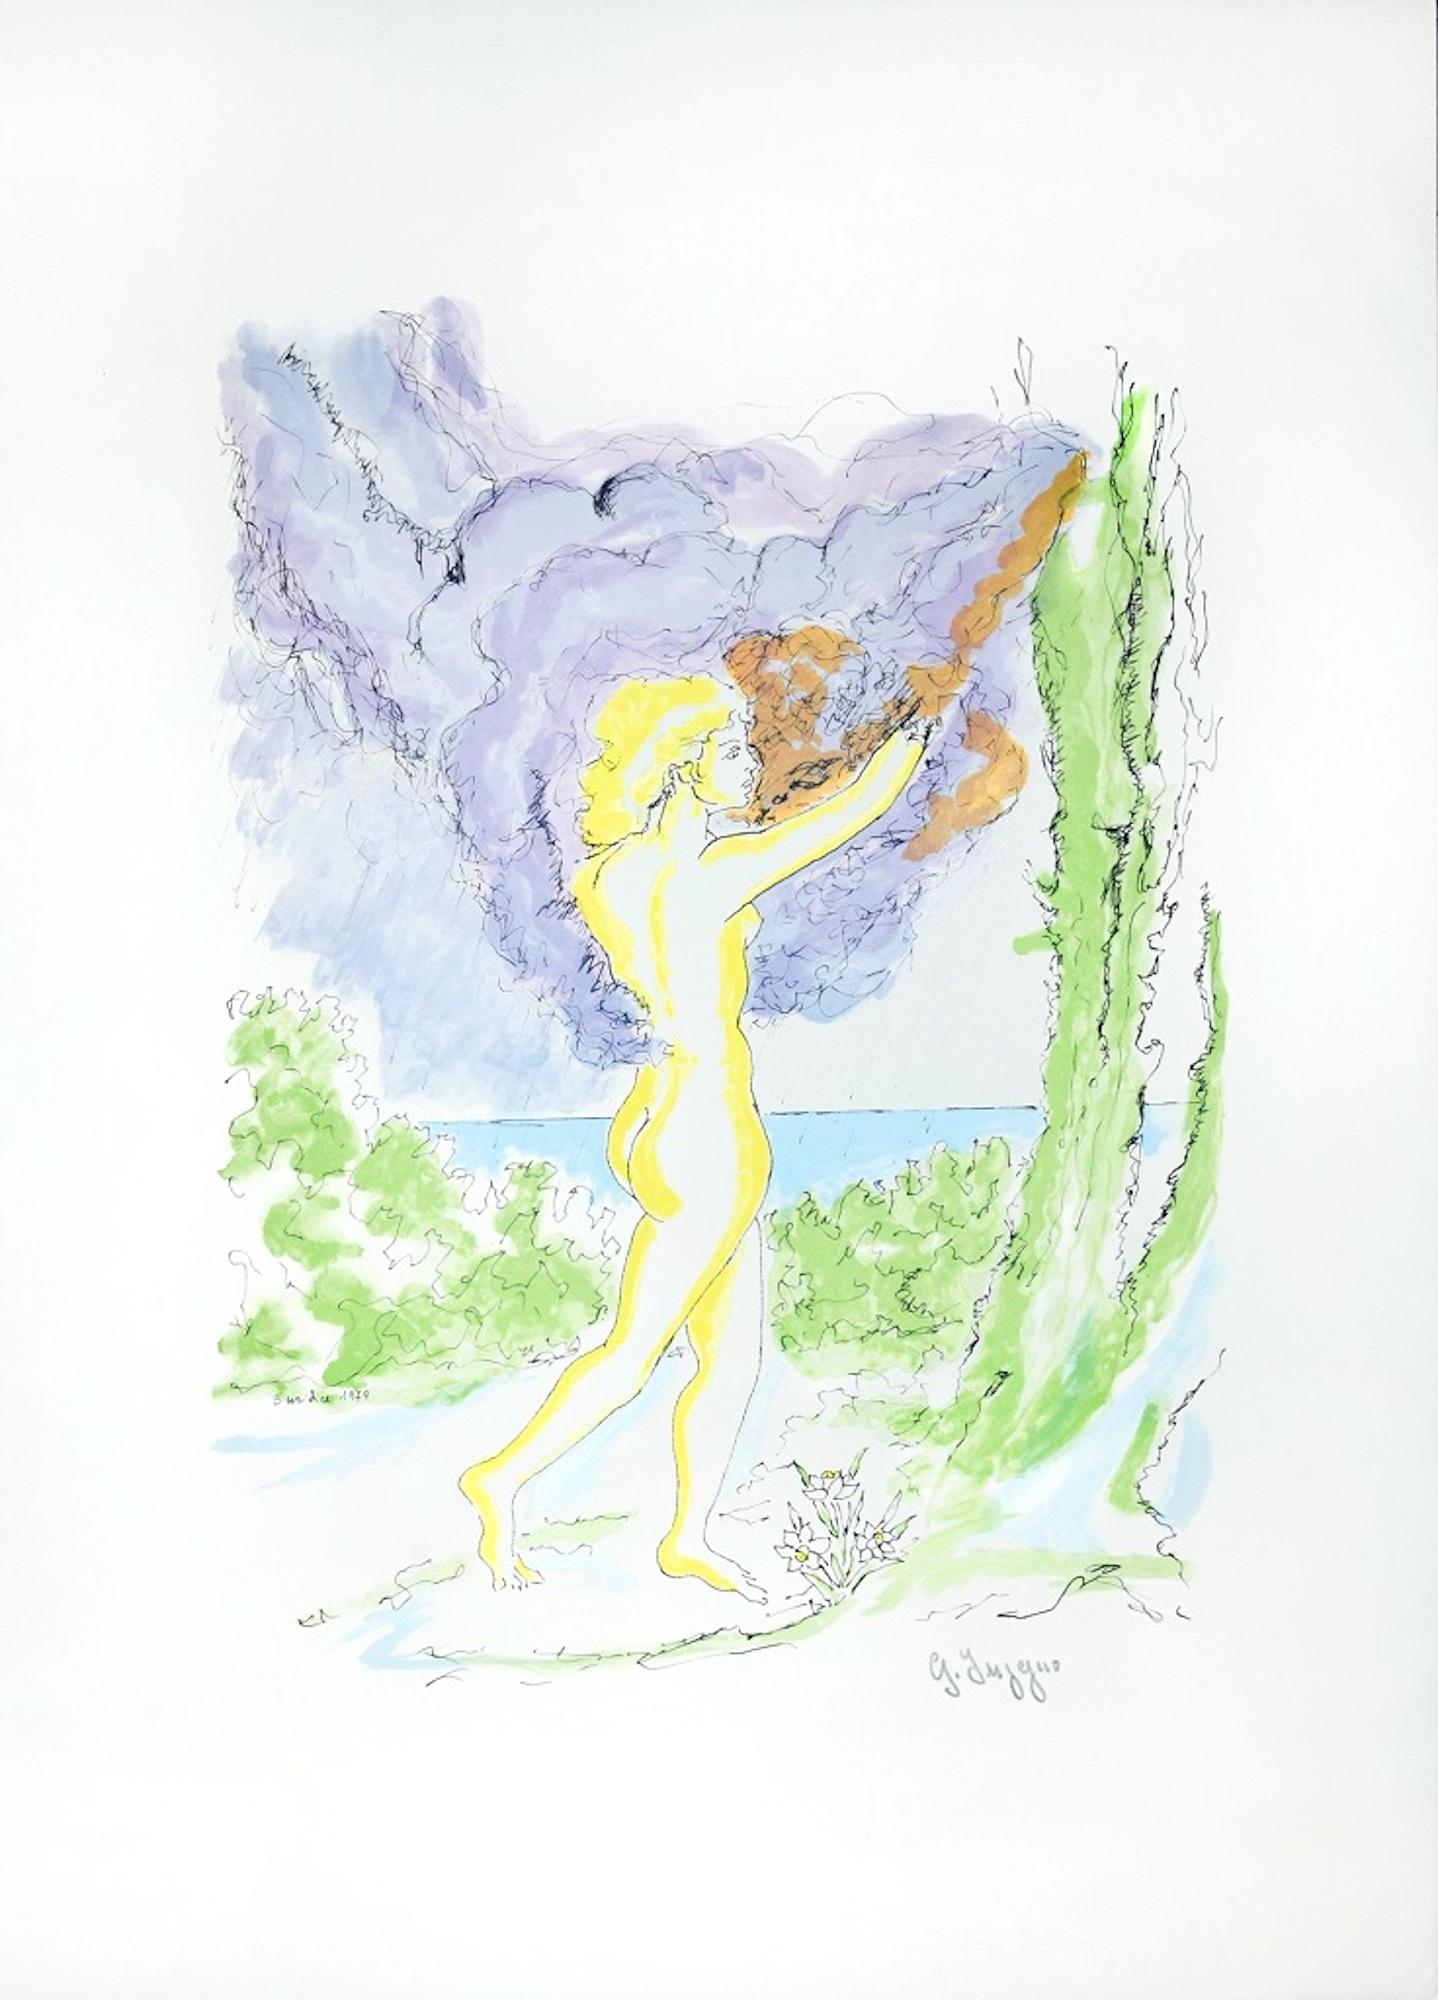 Euridice is an original print realized by Giuseppe Ingegno in 1979.

Colored print. 

Good conditions.

Hand signed in pencil lower right. Titled and dated on plate

This beautiful colored print represents Eurydice, an oak nymph and one of the